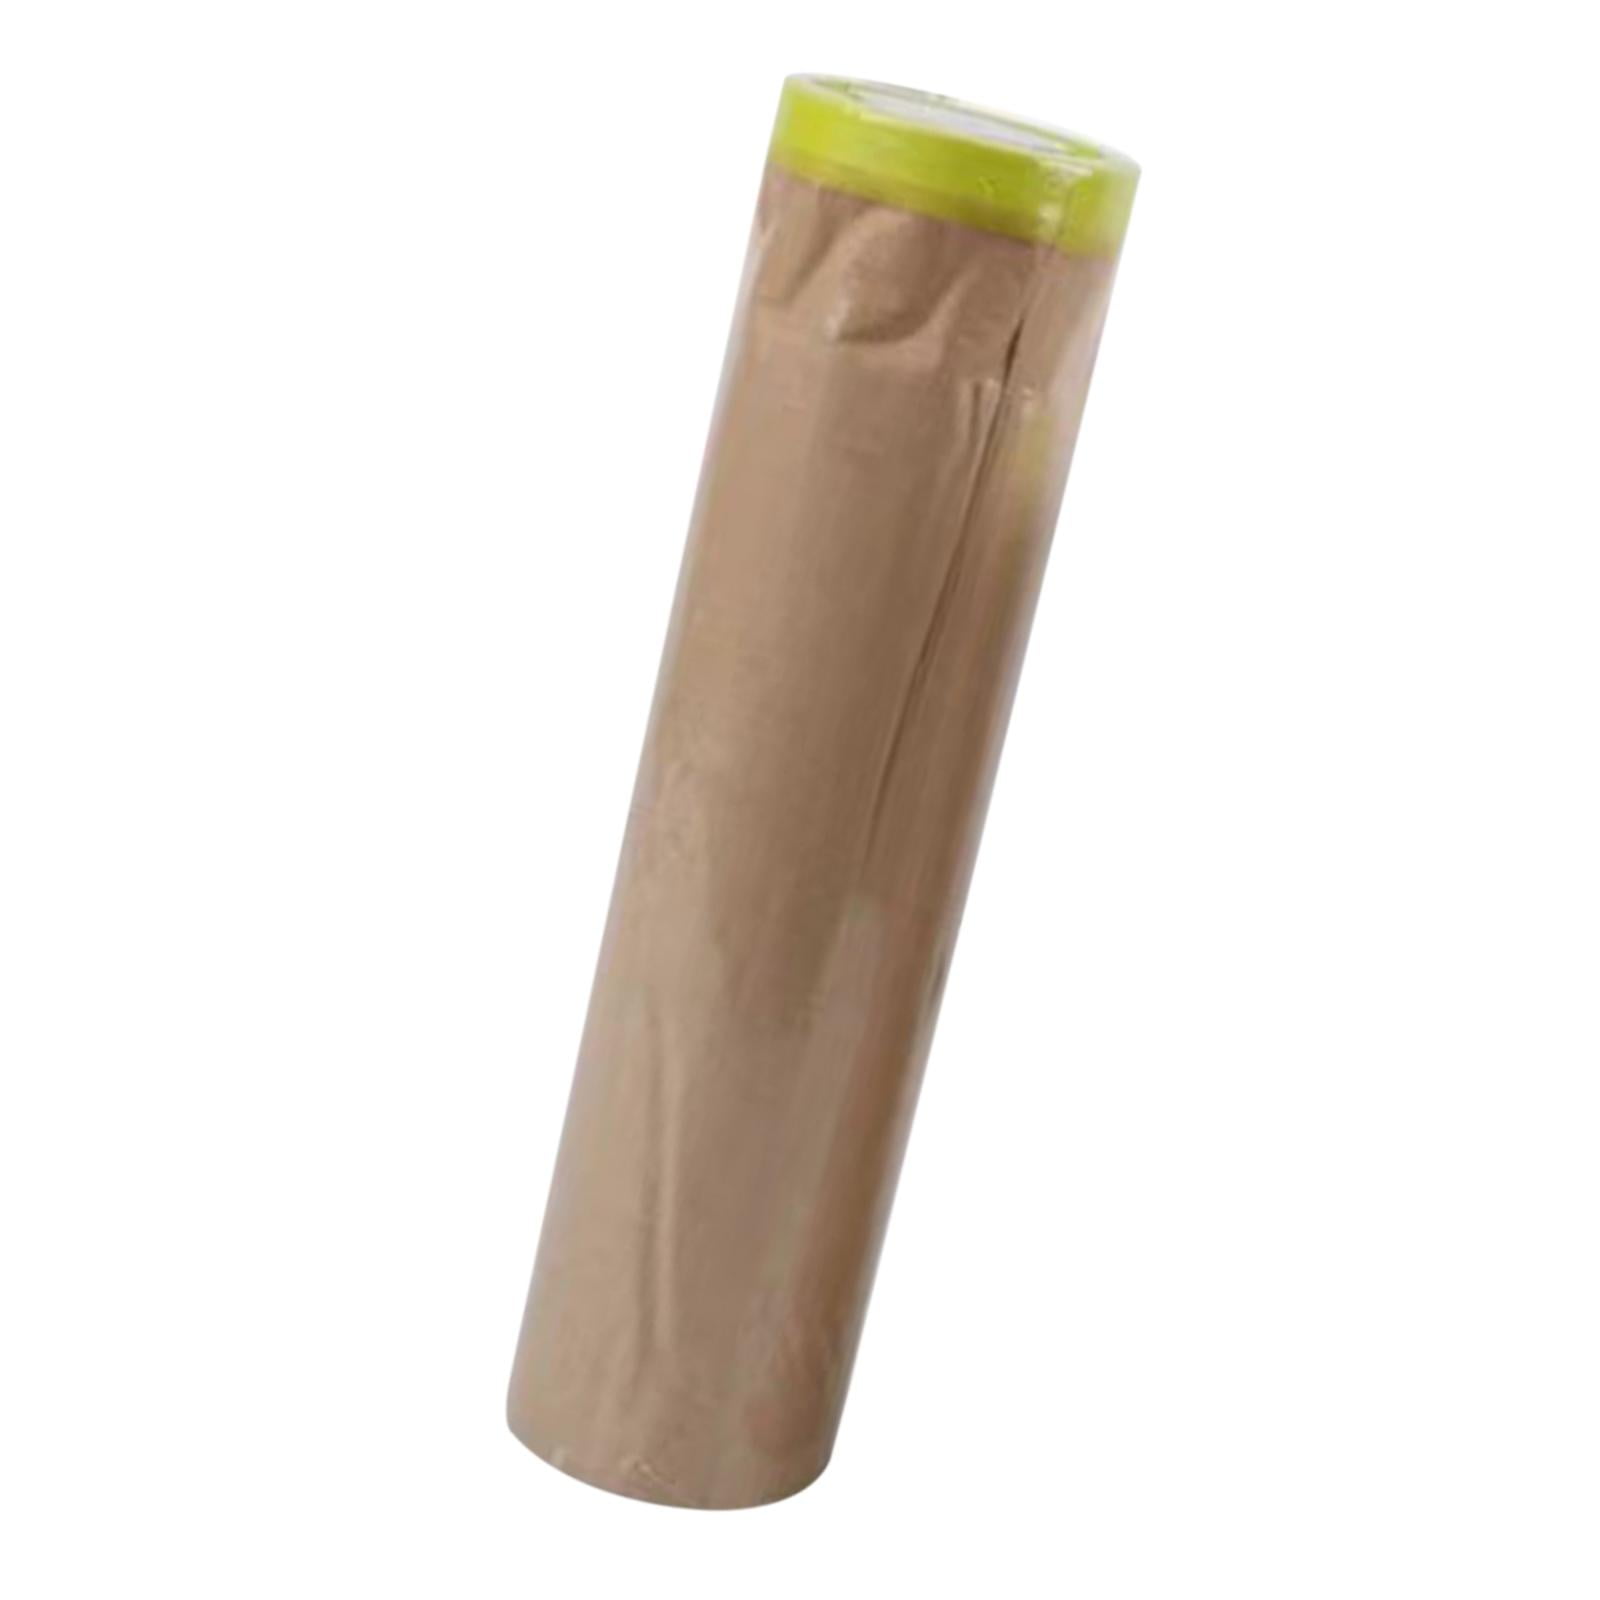 Pre-Taped Brown Masking Paper 24 inchx50' for Painting Tape and Drape Painters Paper, Paint Adhesive Protective Paper Roll for Car, and Furniture